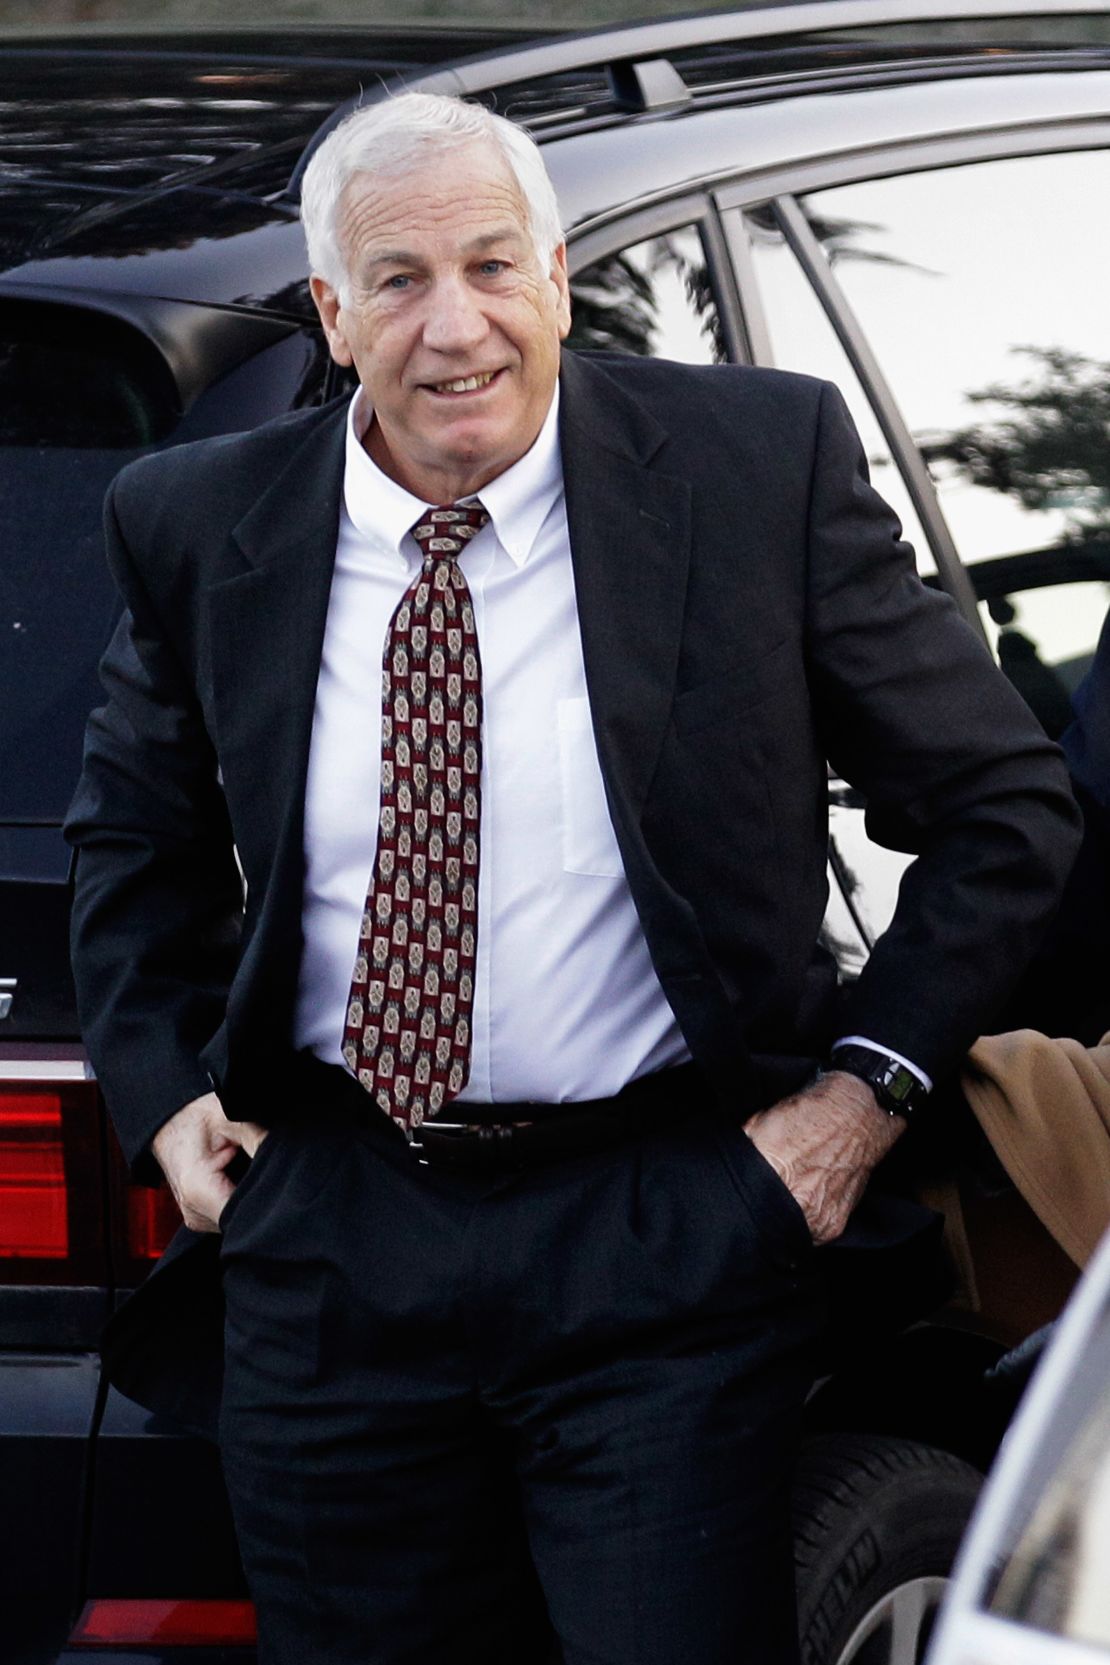 Jerry Sandusky arrives at the Centre County Courthouse on December 13, 2011, in Bellefonte, Pennsylvania. 